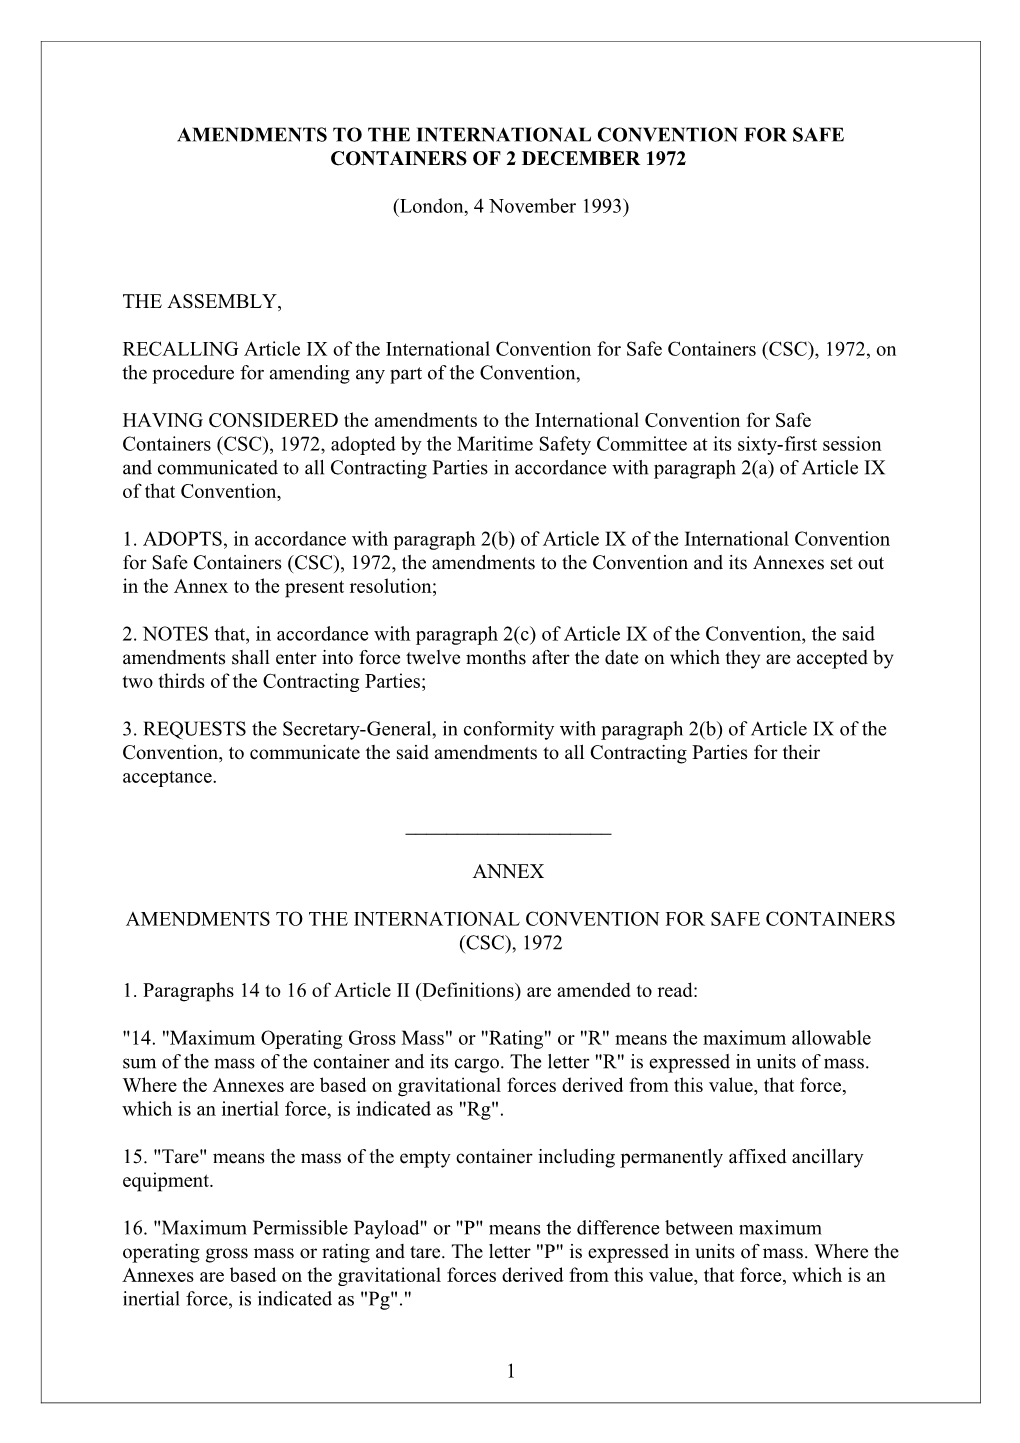 Amendments to the International Convention for Safe Containers of 2 December 1972